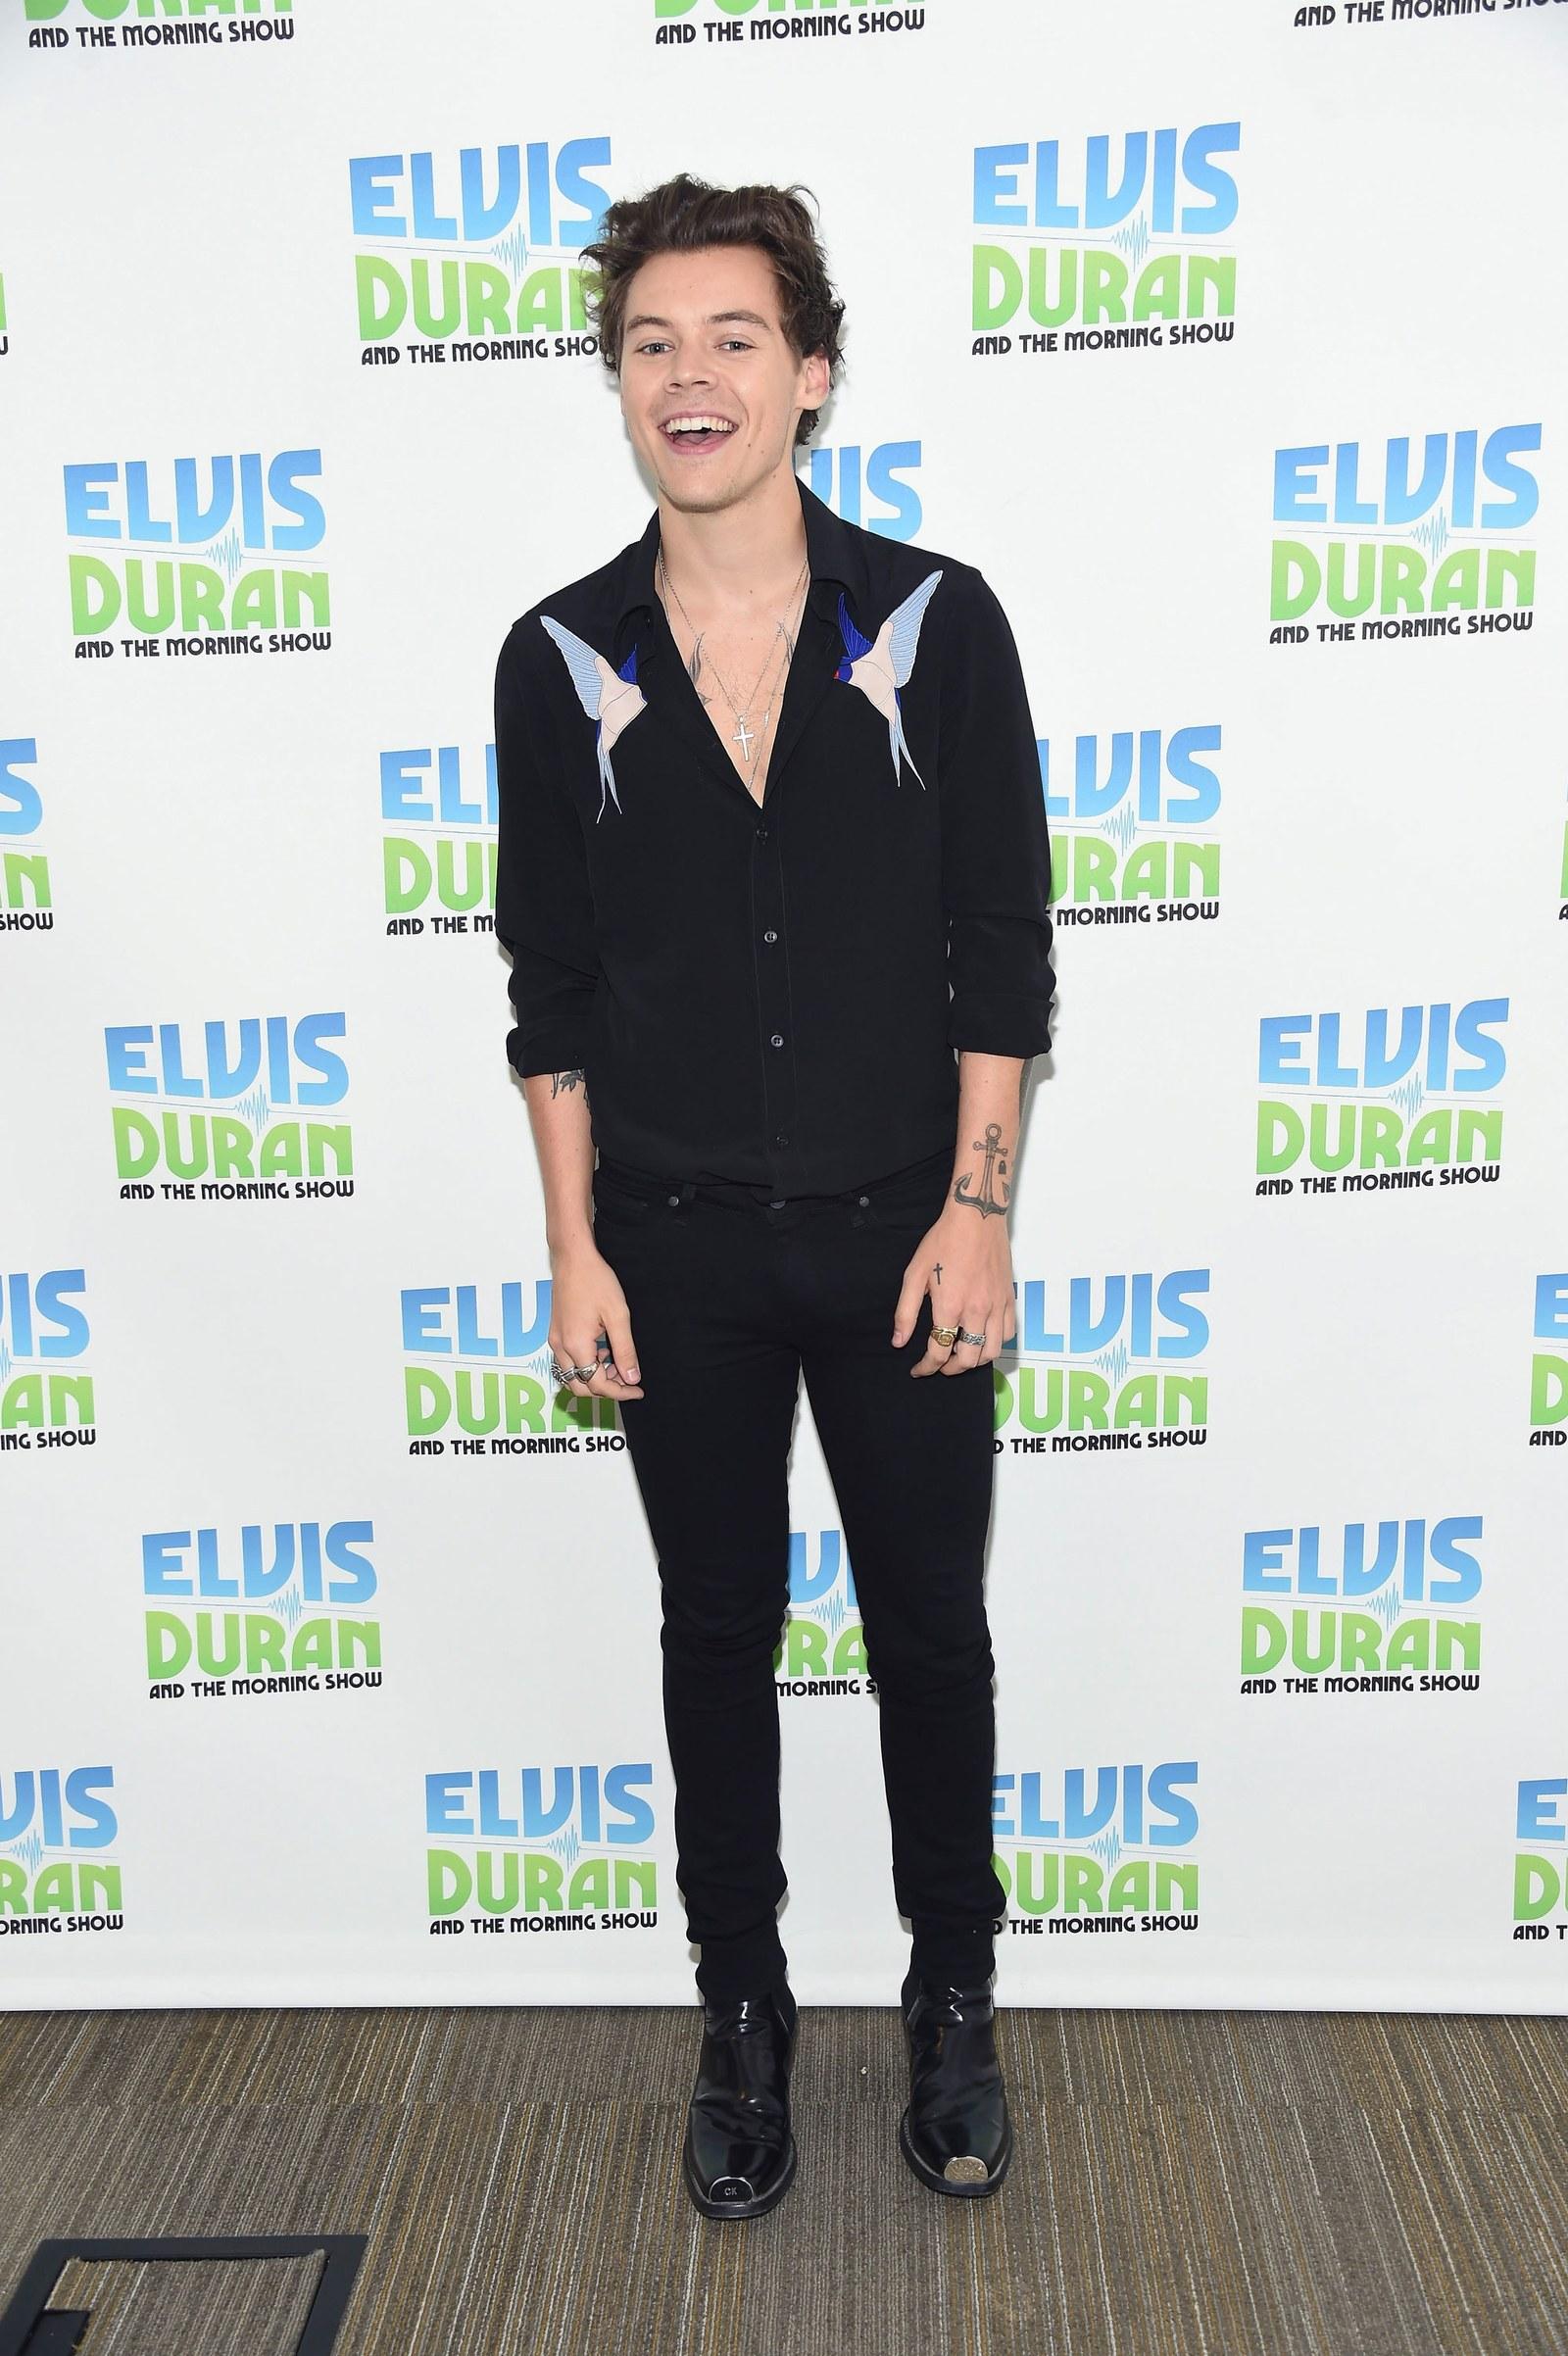 Times Harry Styles' Style Proved He'd Be Perfect for the Role